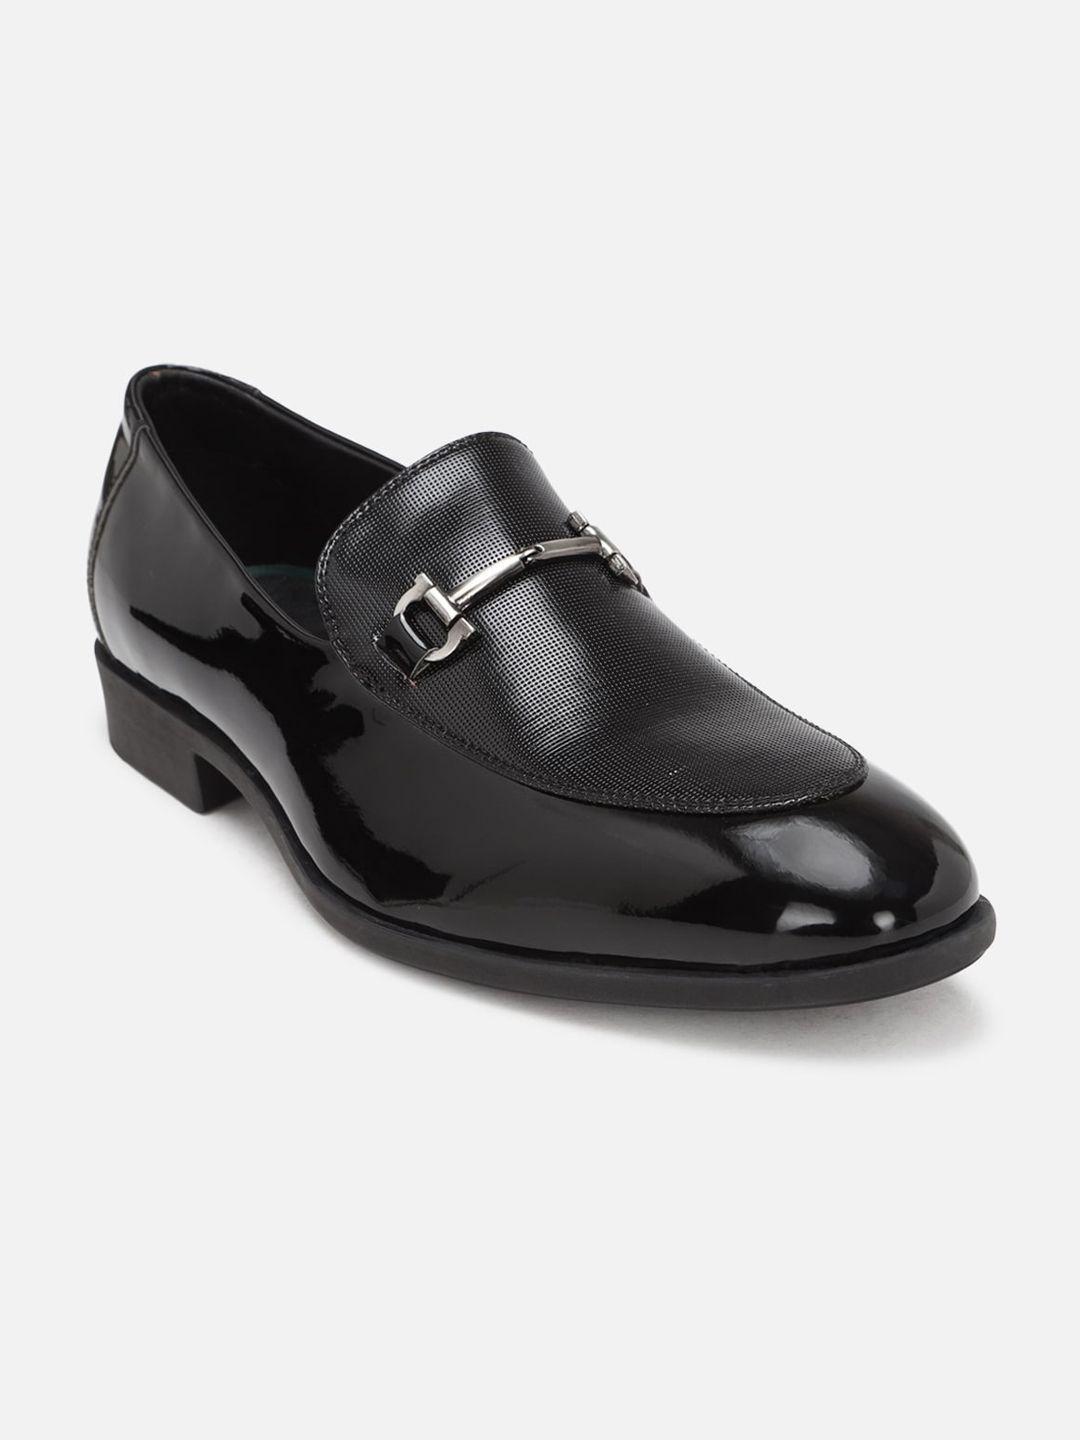 peter-england-men-textured-leather-formal-slip-on-shoes